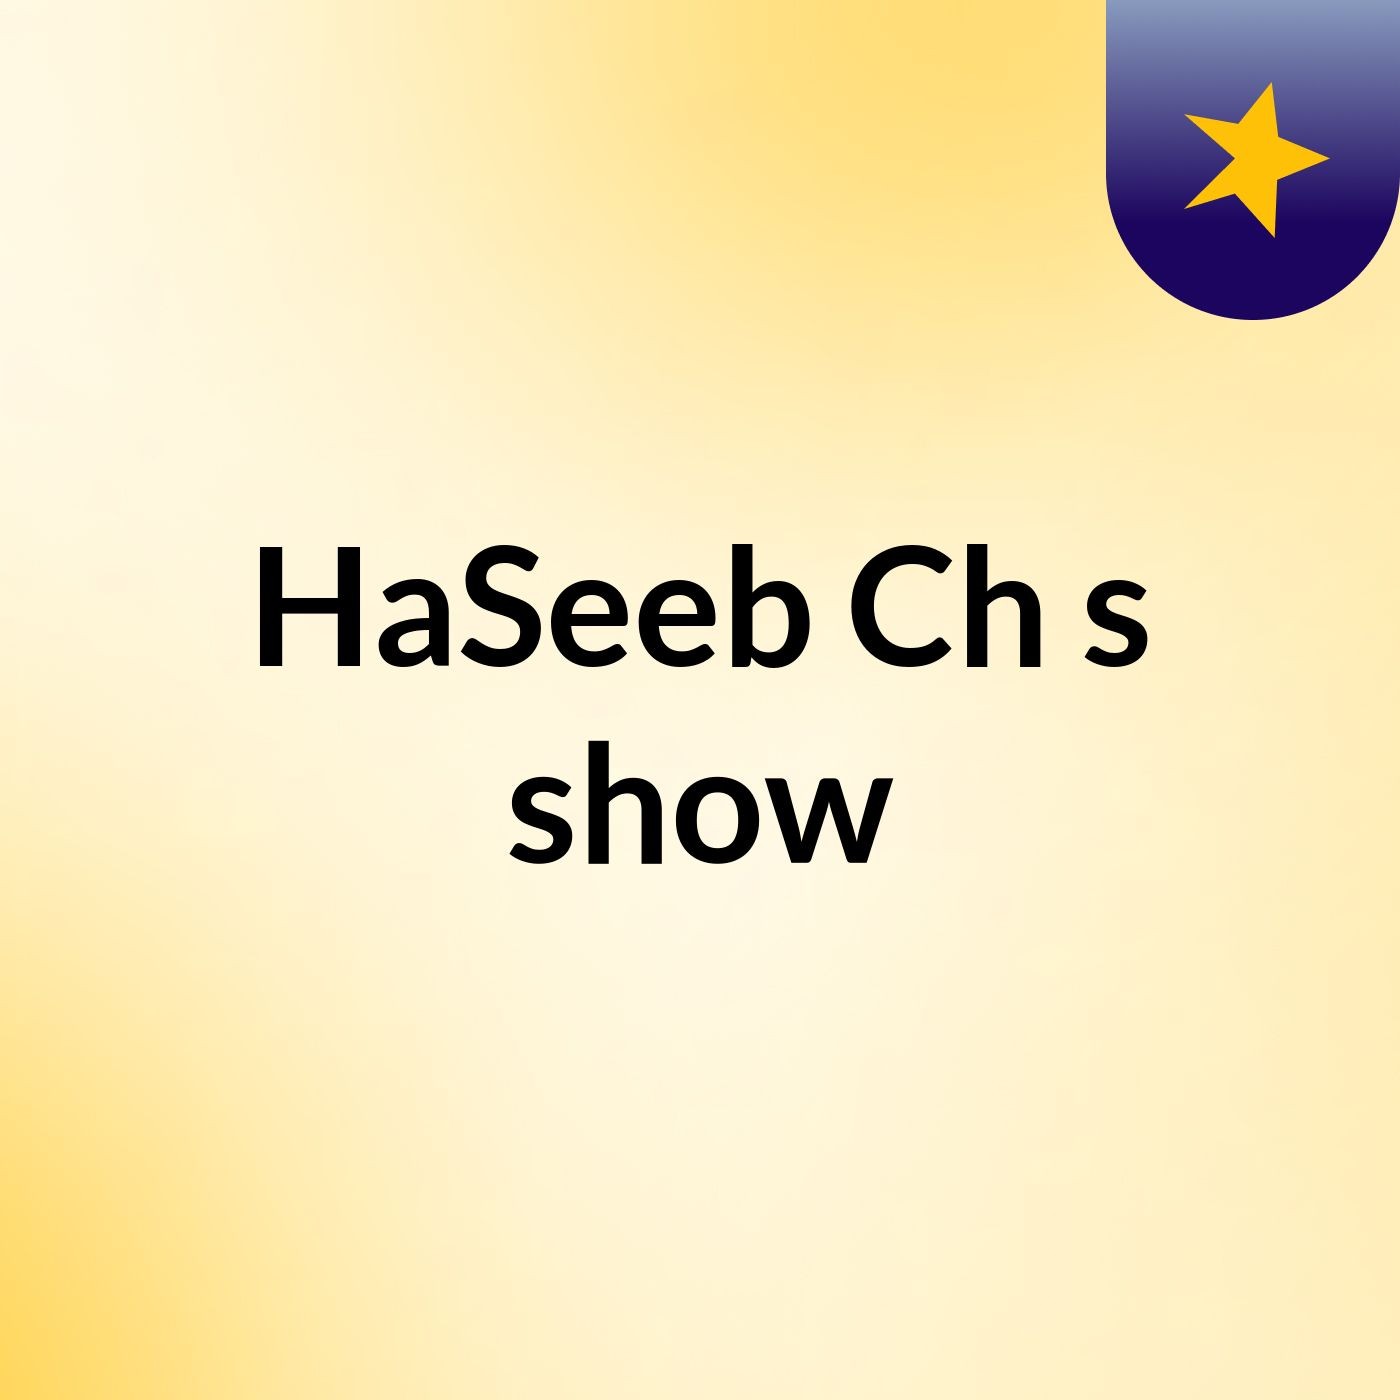 HaSeeb Ch's show